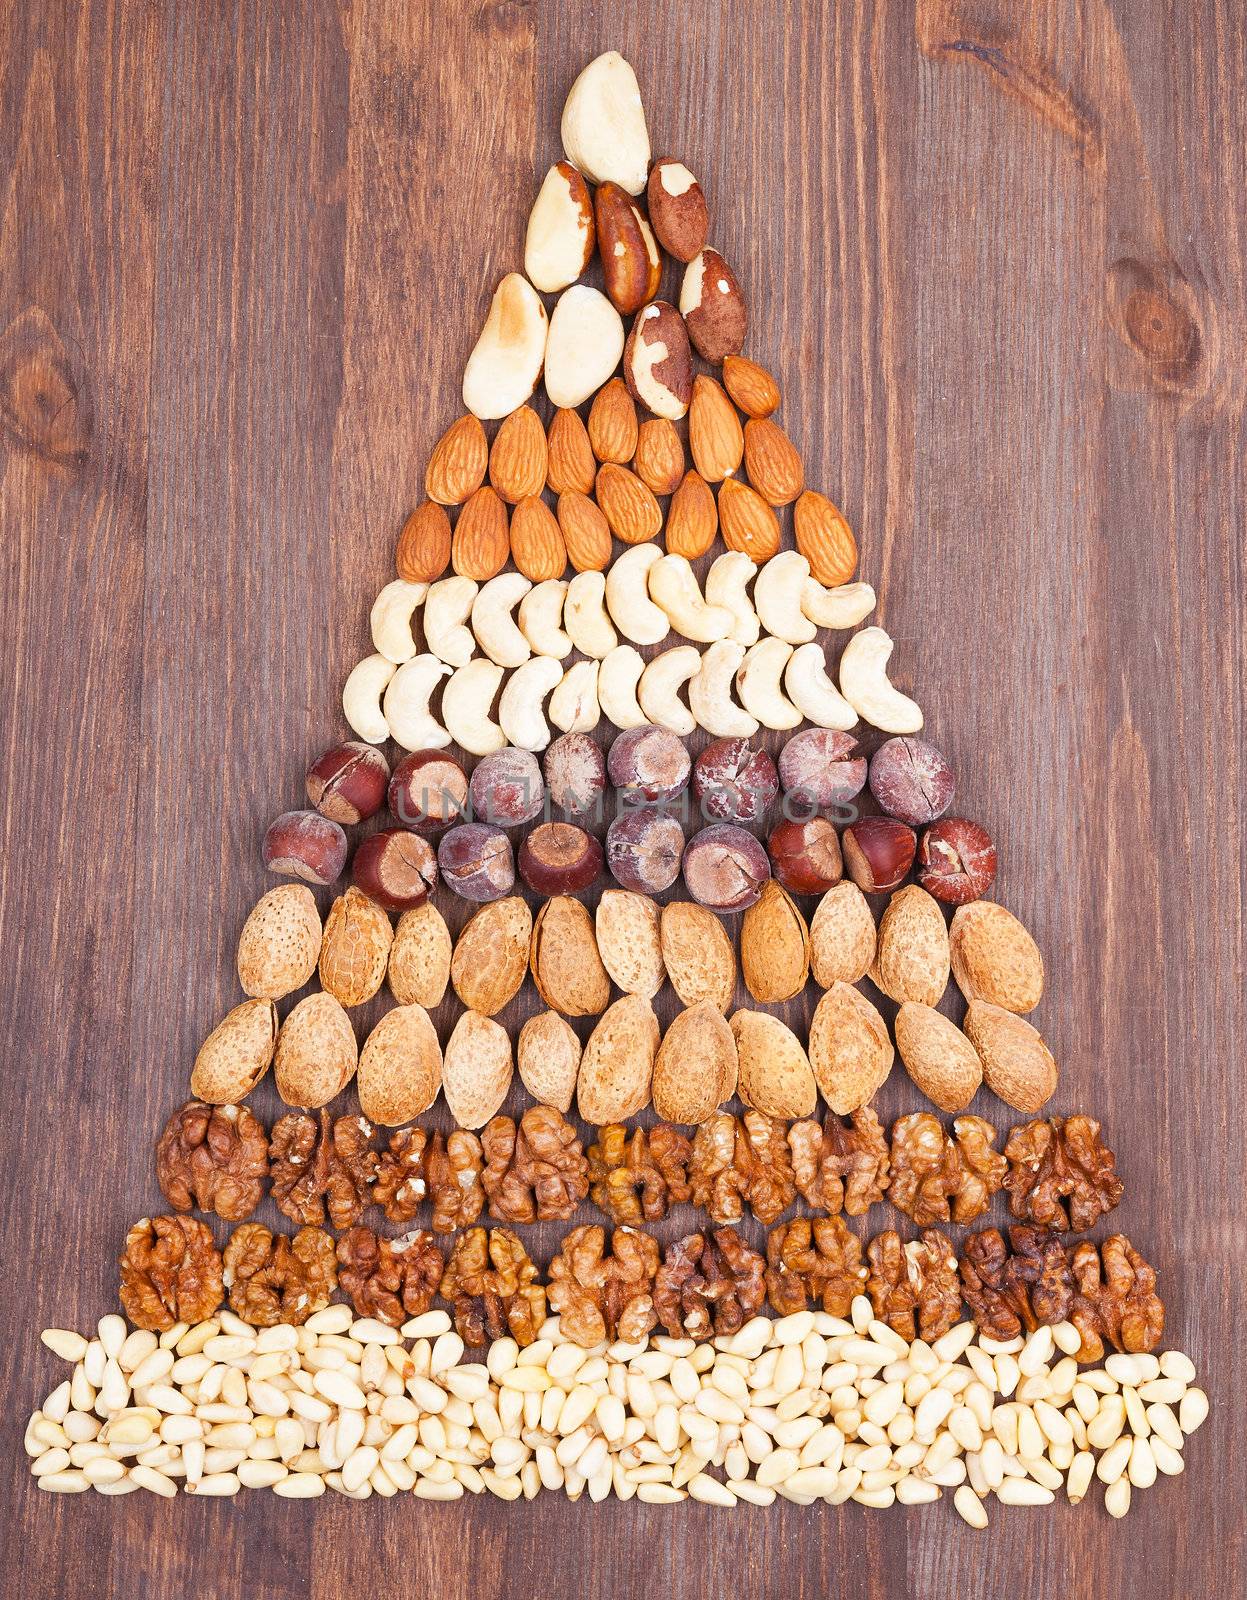 Various kinds of nuts on a wooden background, in the form of a pyramid